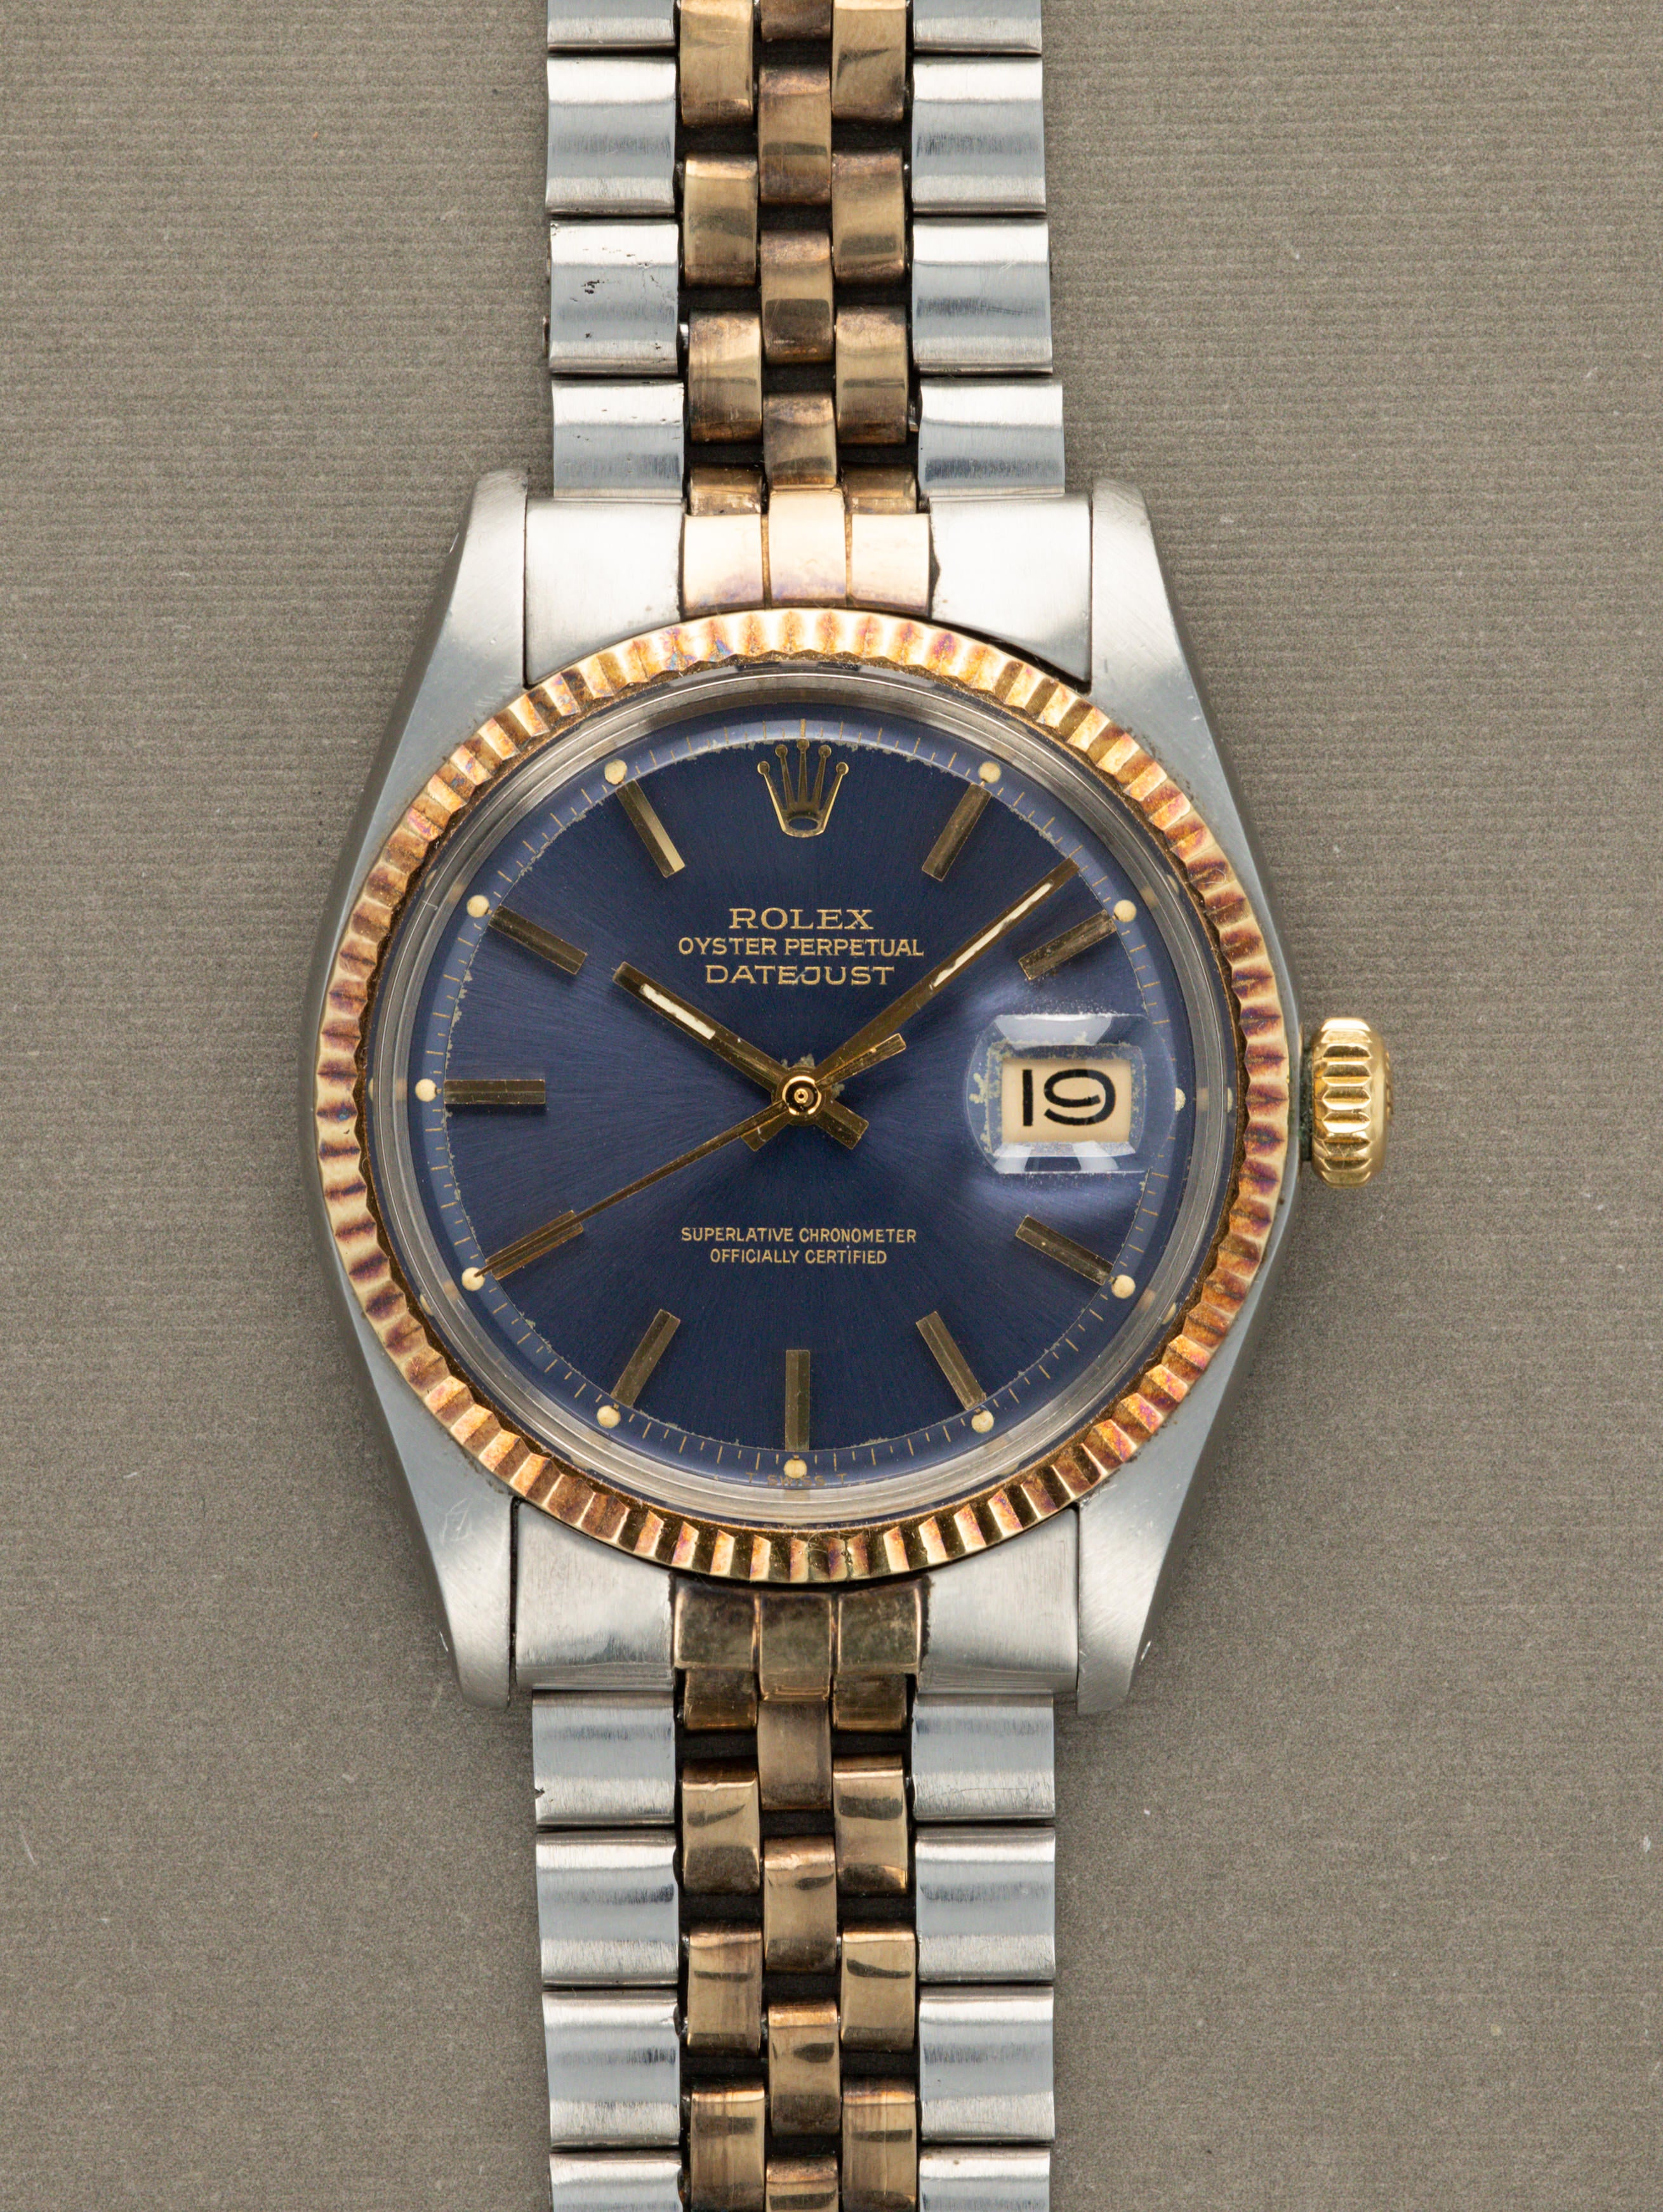 Rolex Datejust Ref. 1601 - Two-Tone Blue Dial